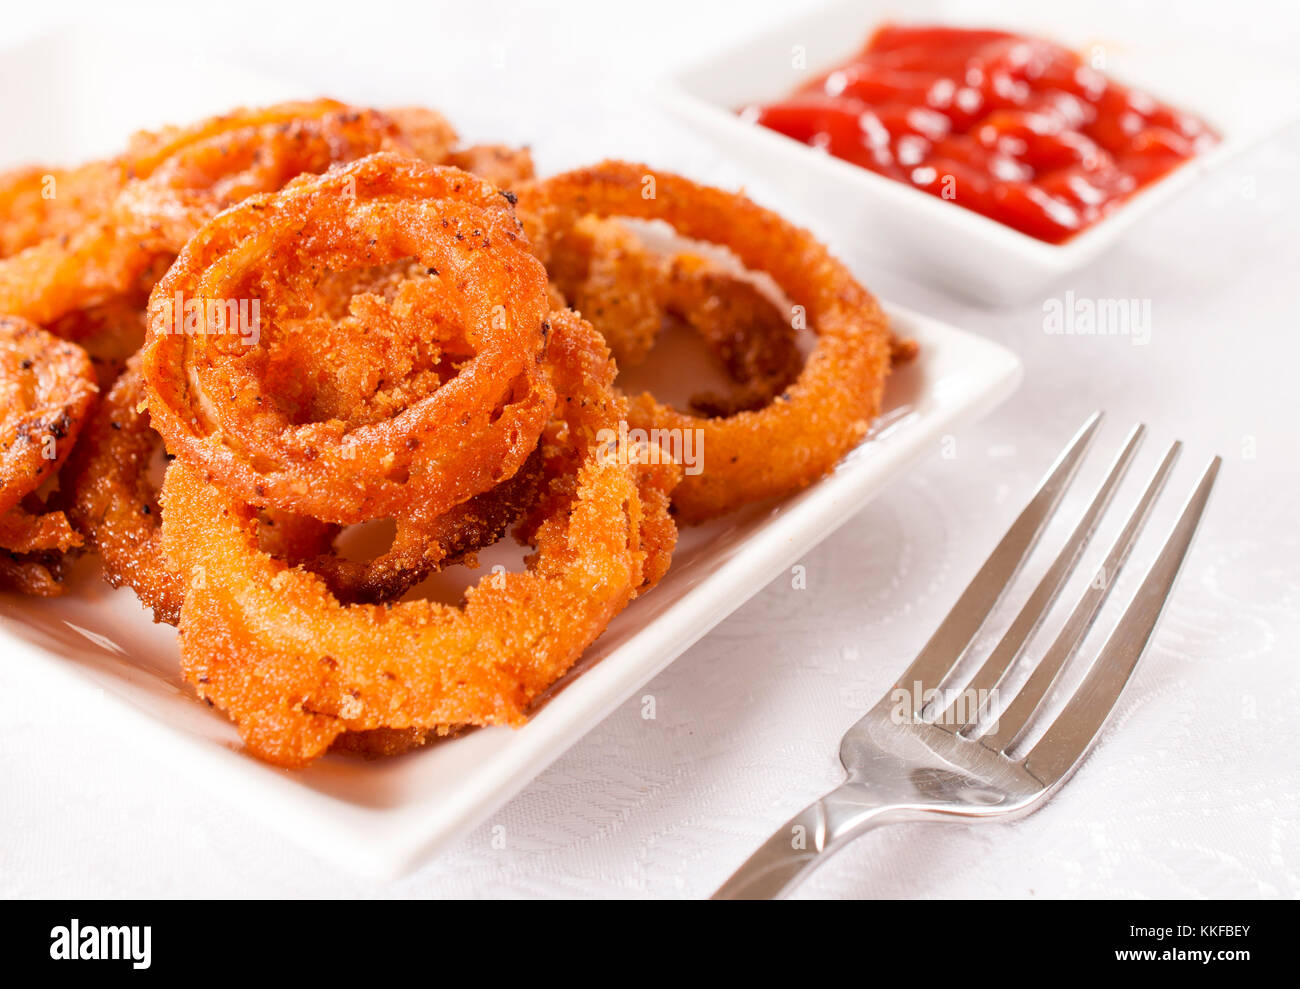 Deep fried homemade onion rings on the plate.Selective focus on the onion rings Stock Photo